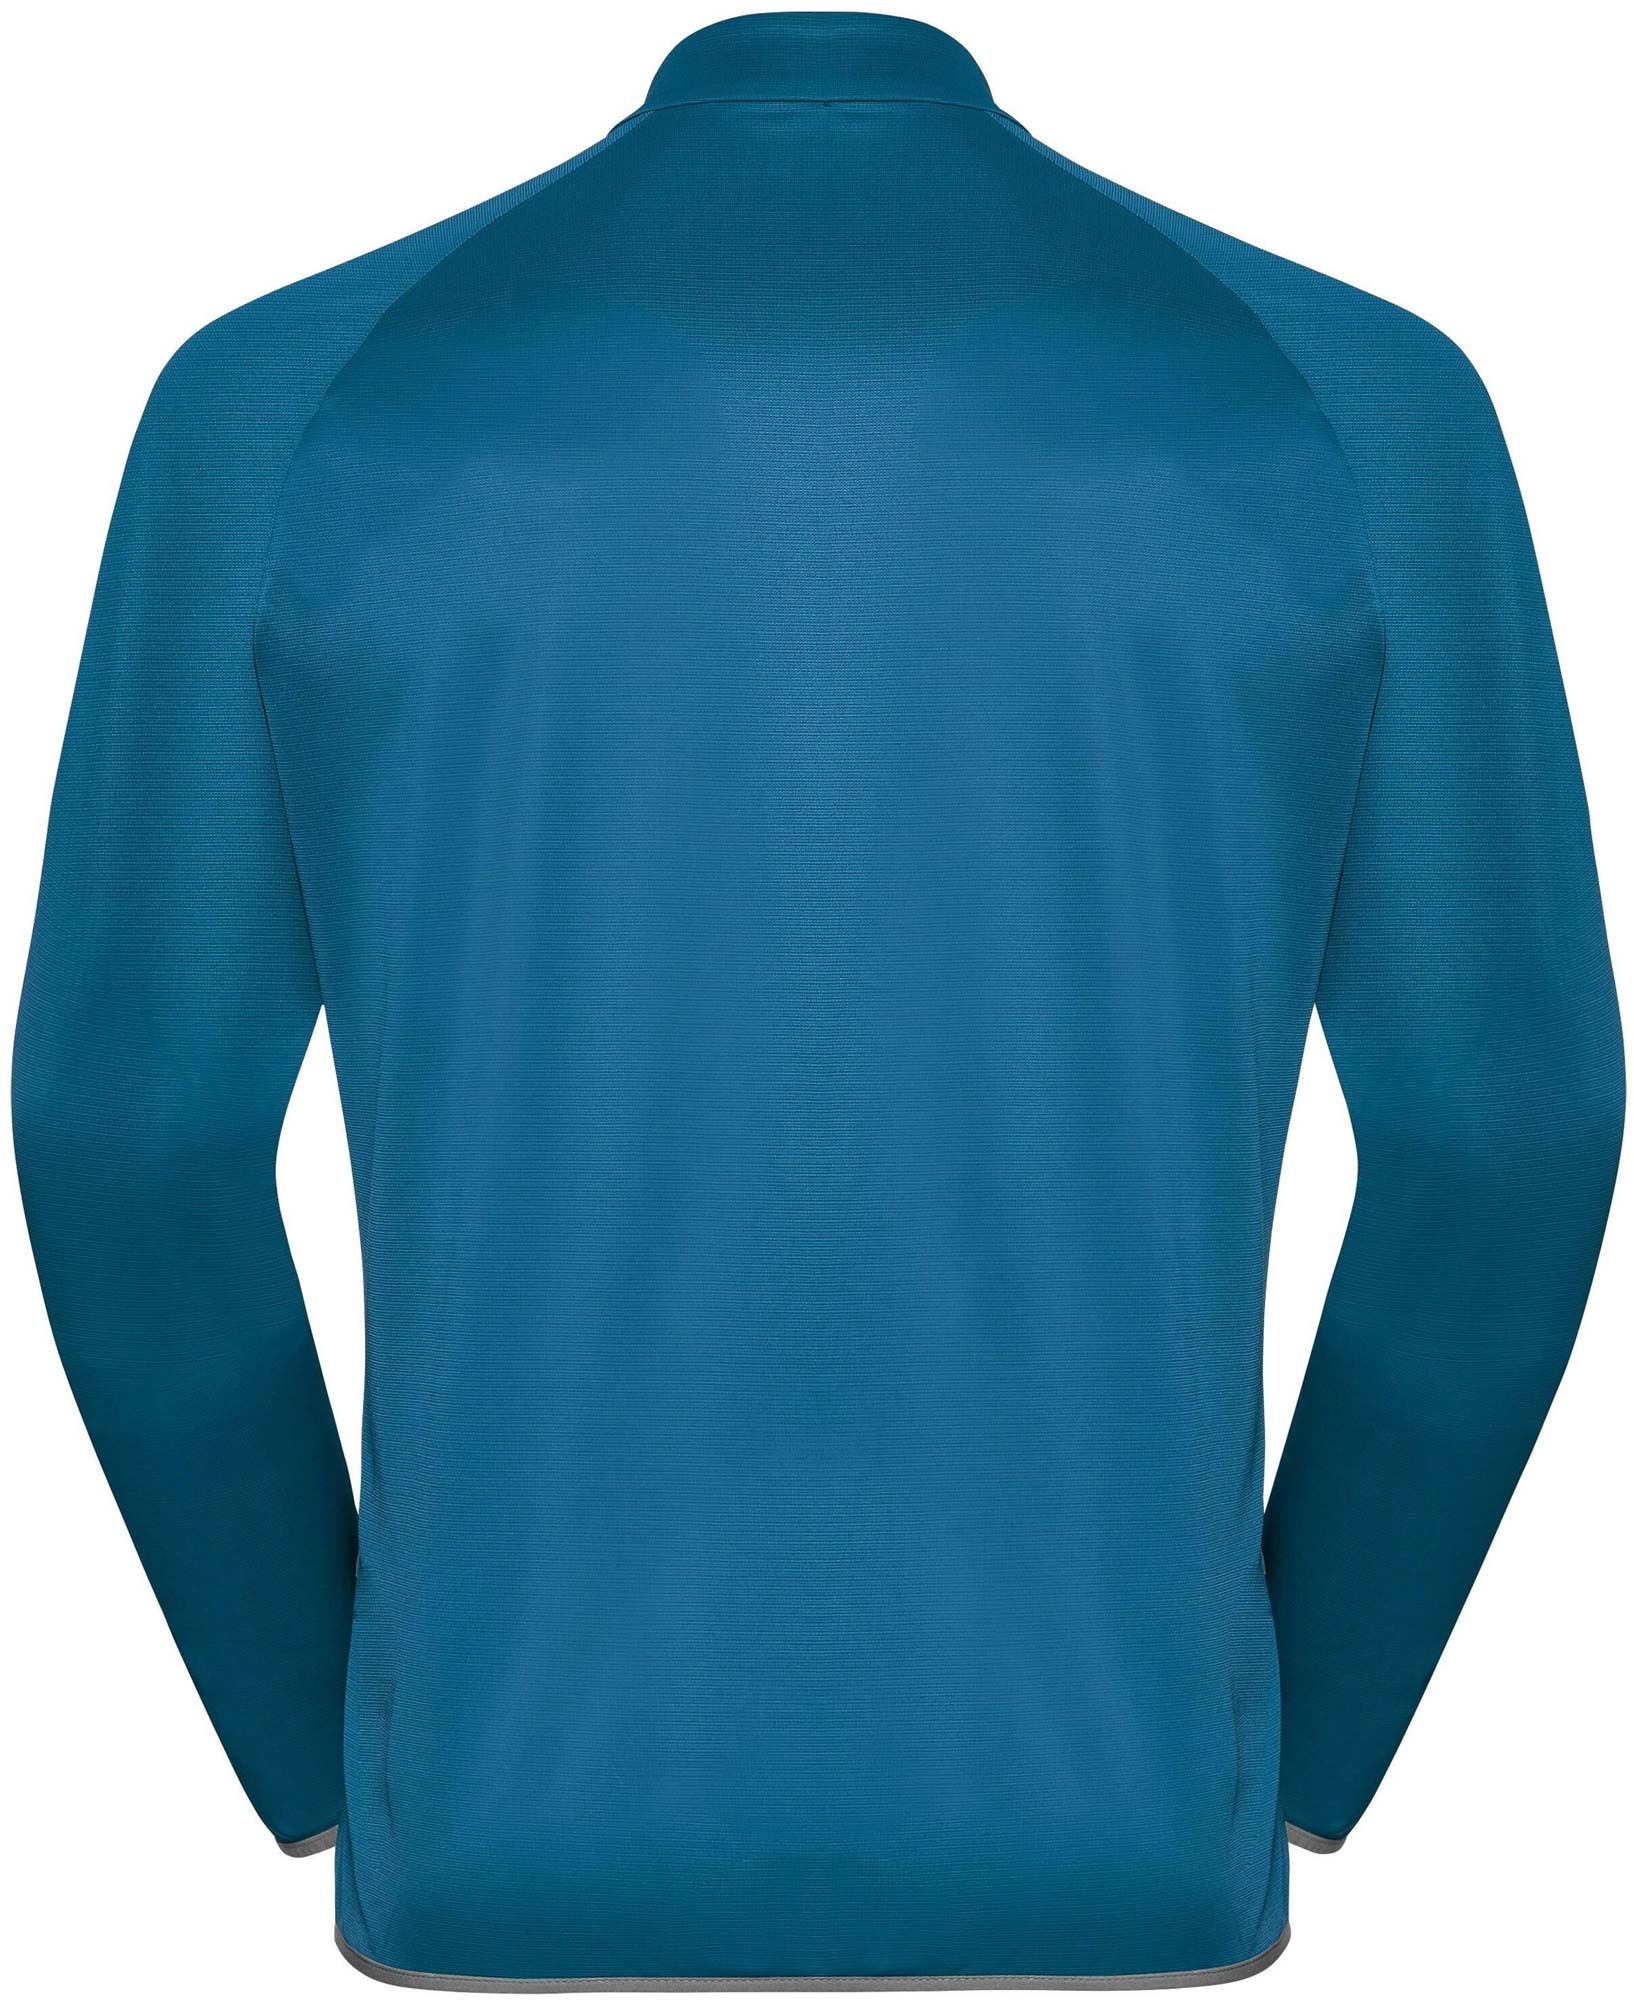 T-shirt with long sleeves and stand-up collar